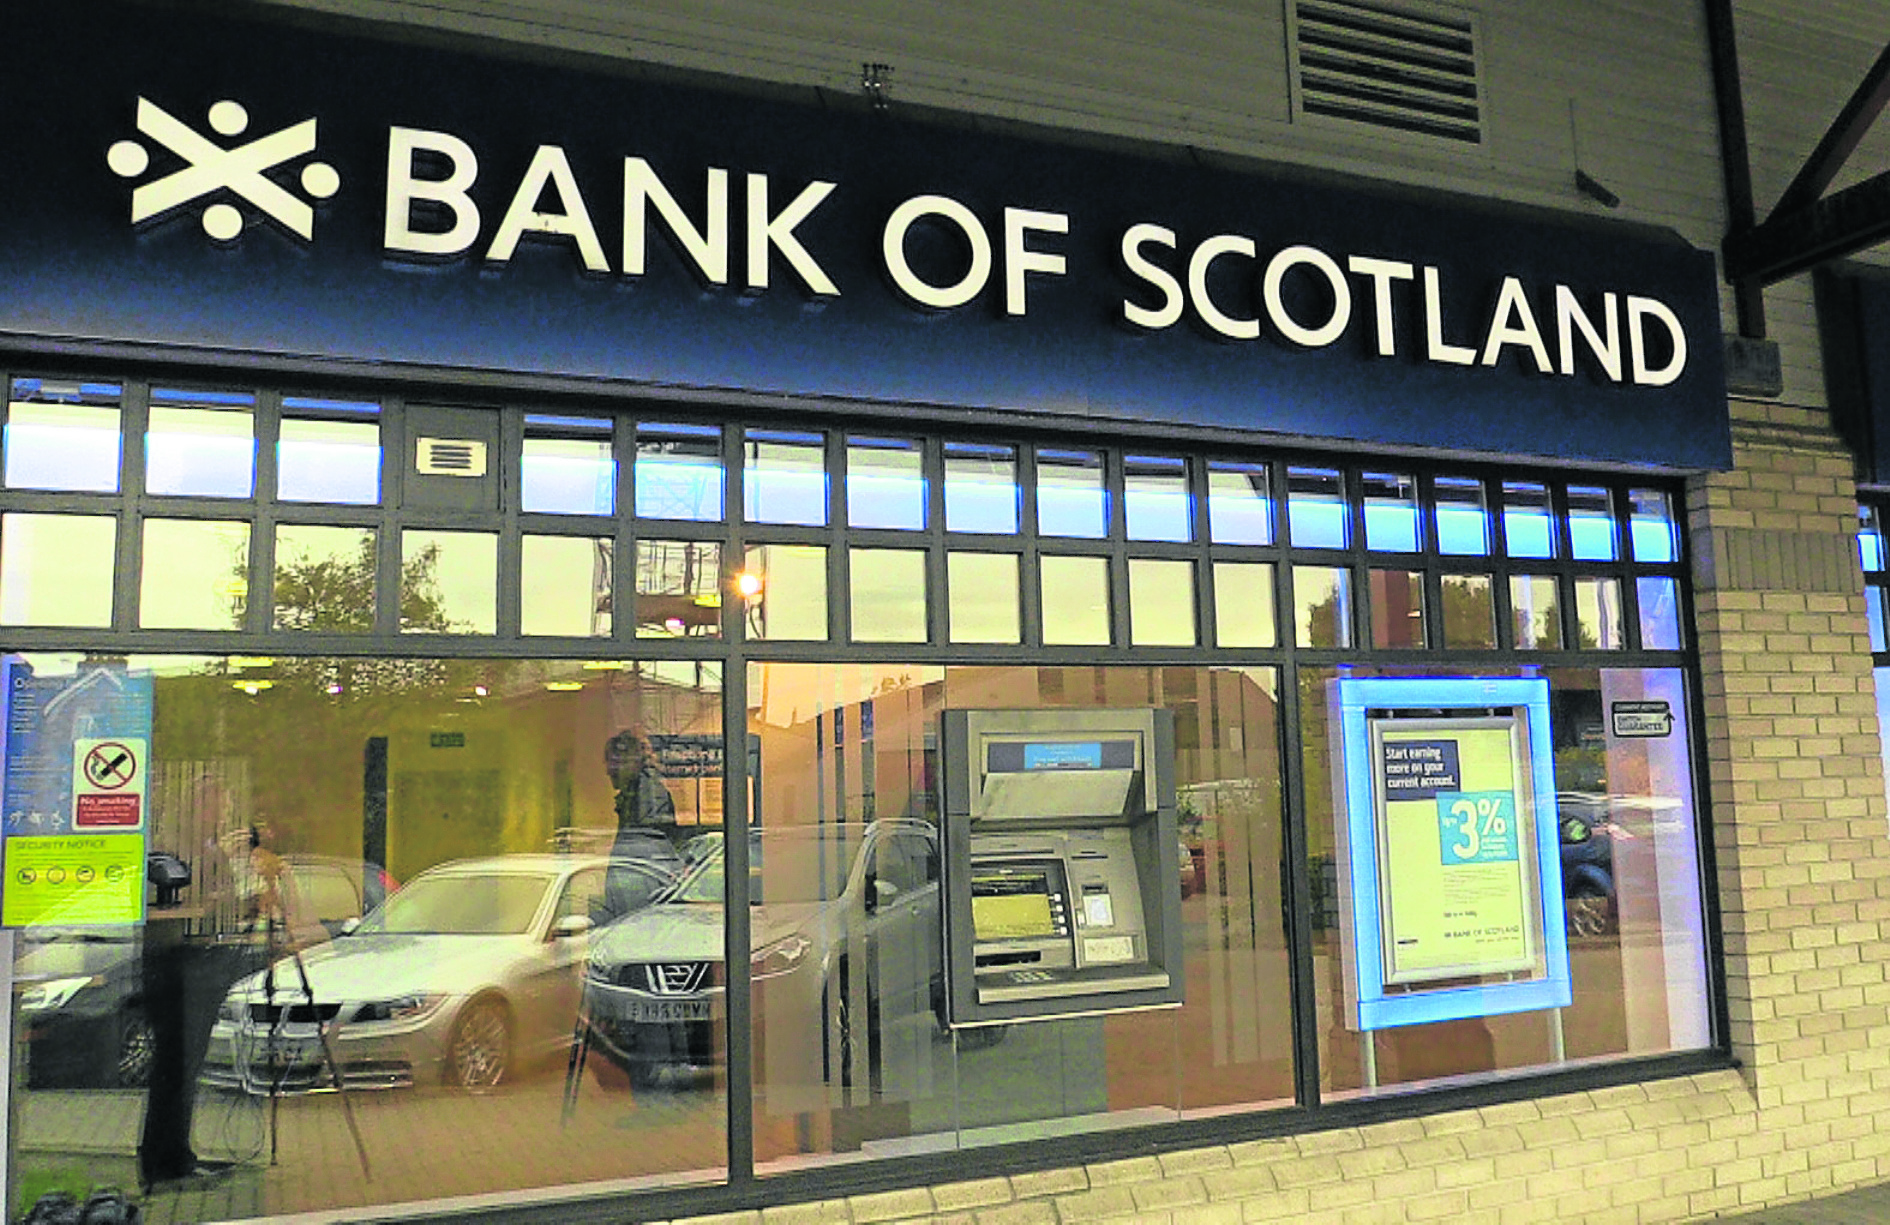 Bank of Scotland closures are planned in Lochgelly and Carnoustie.